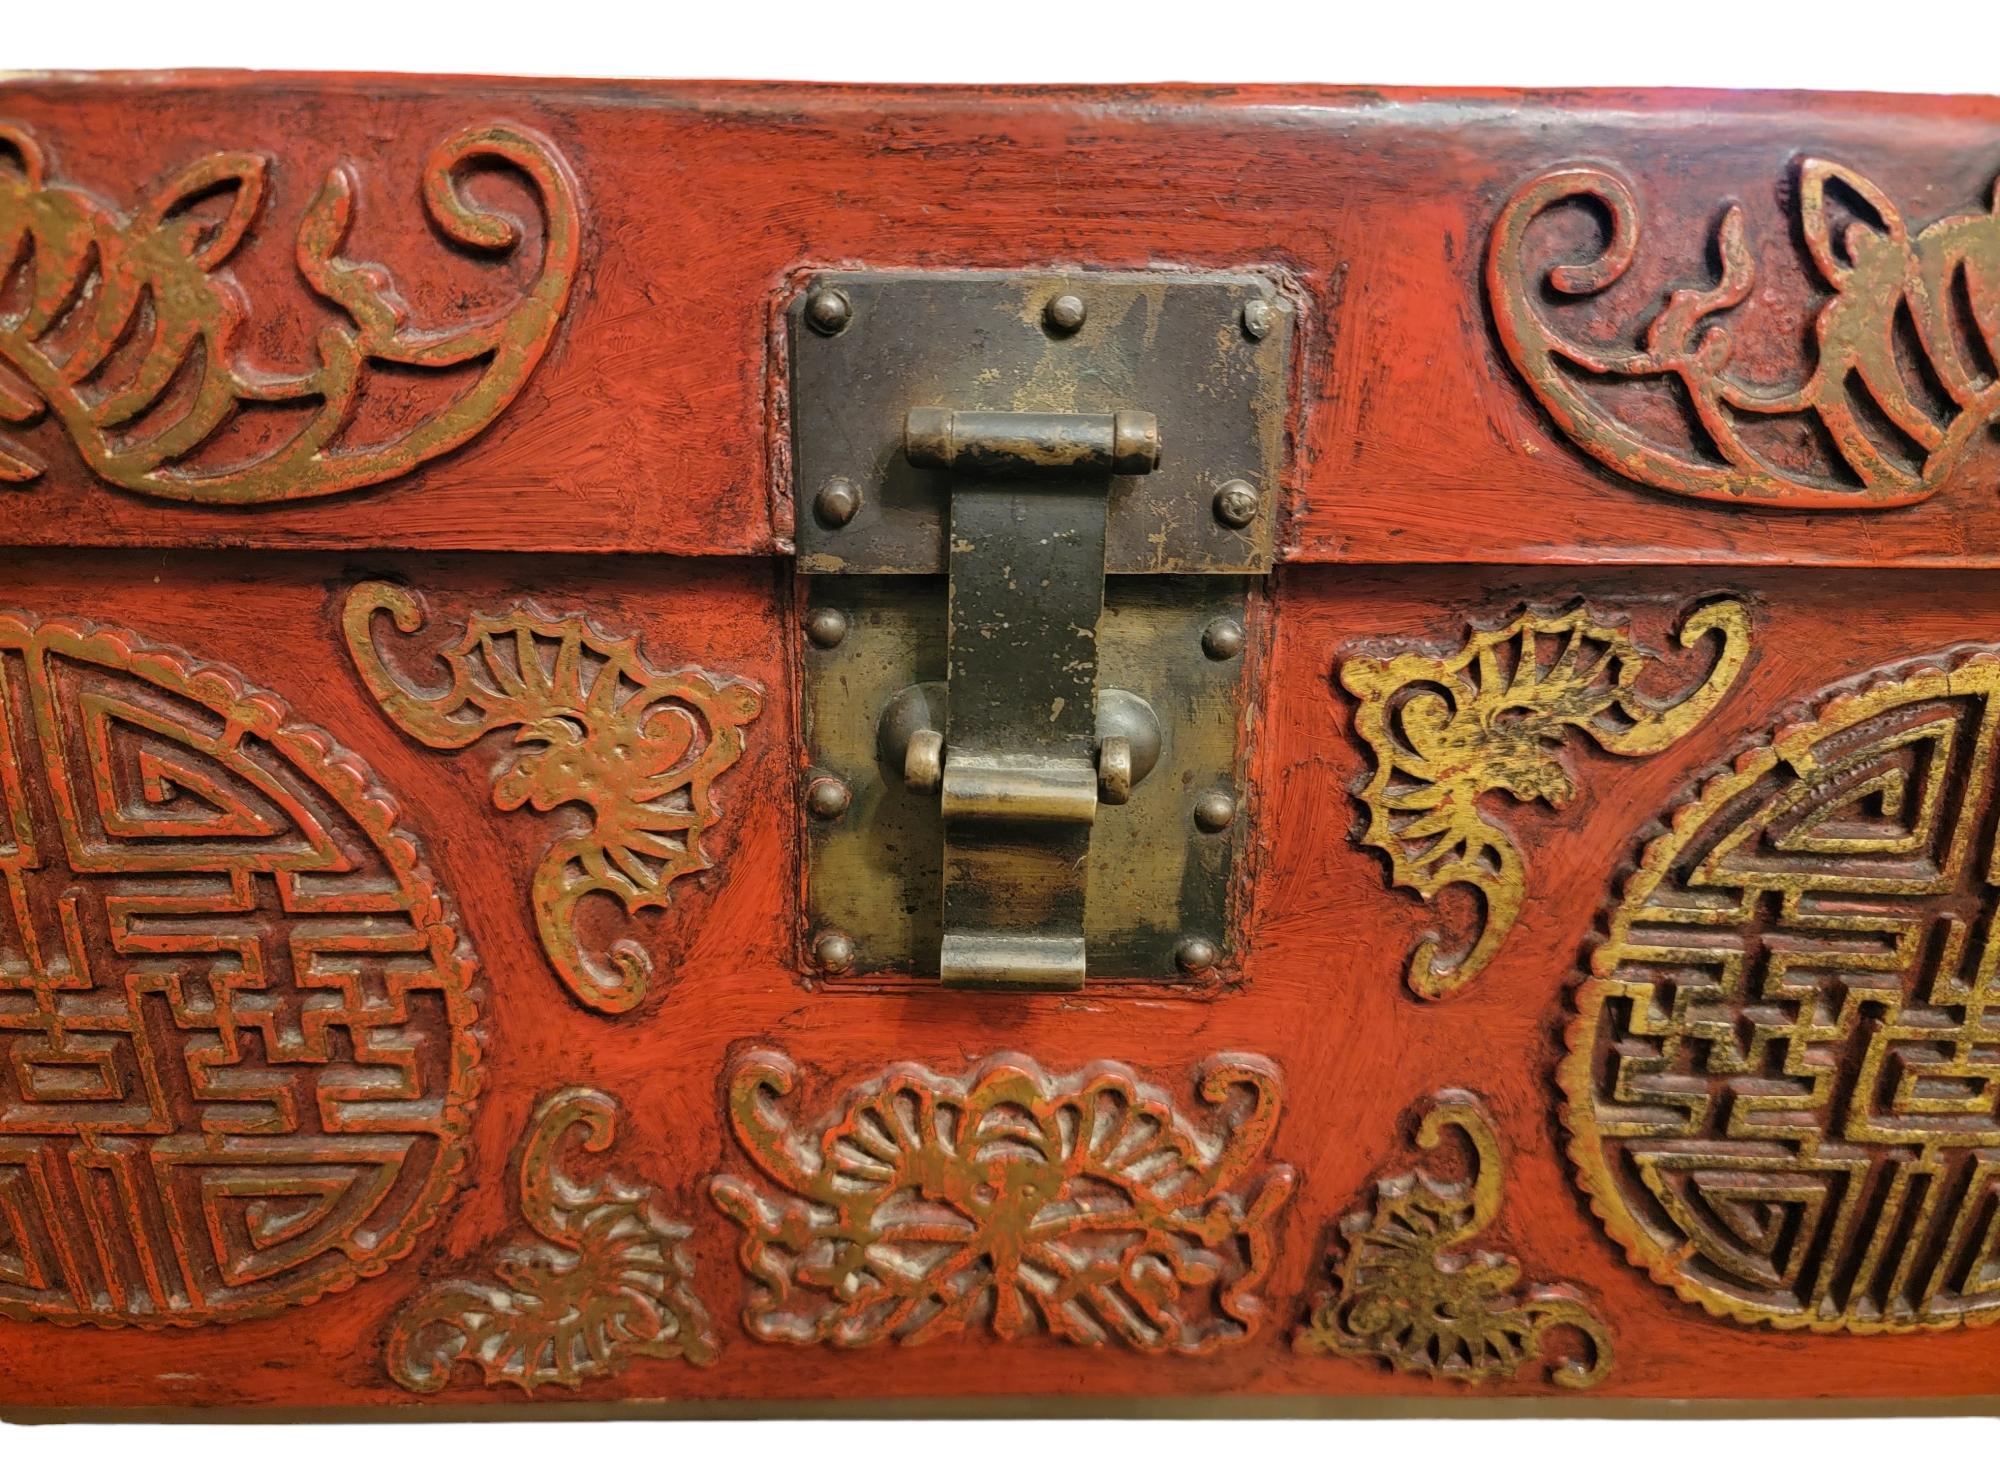 Late 18thC Chinese Single Leather Wooden Trunk. 
his trunk has held its look and feel. The exterior shows great age and patina. When opening the trunk, the leather looks and feels wonderfully aged wrapped around wood. Great feel throughout the